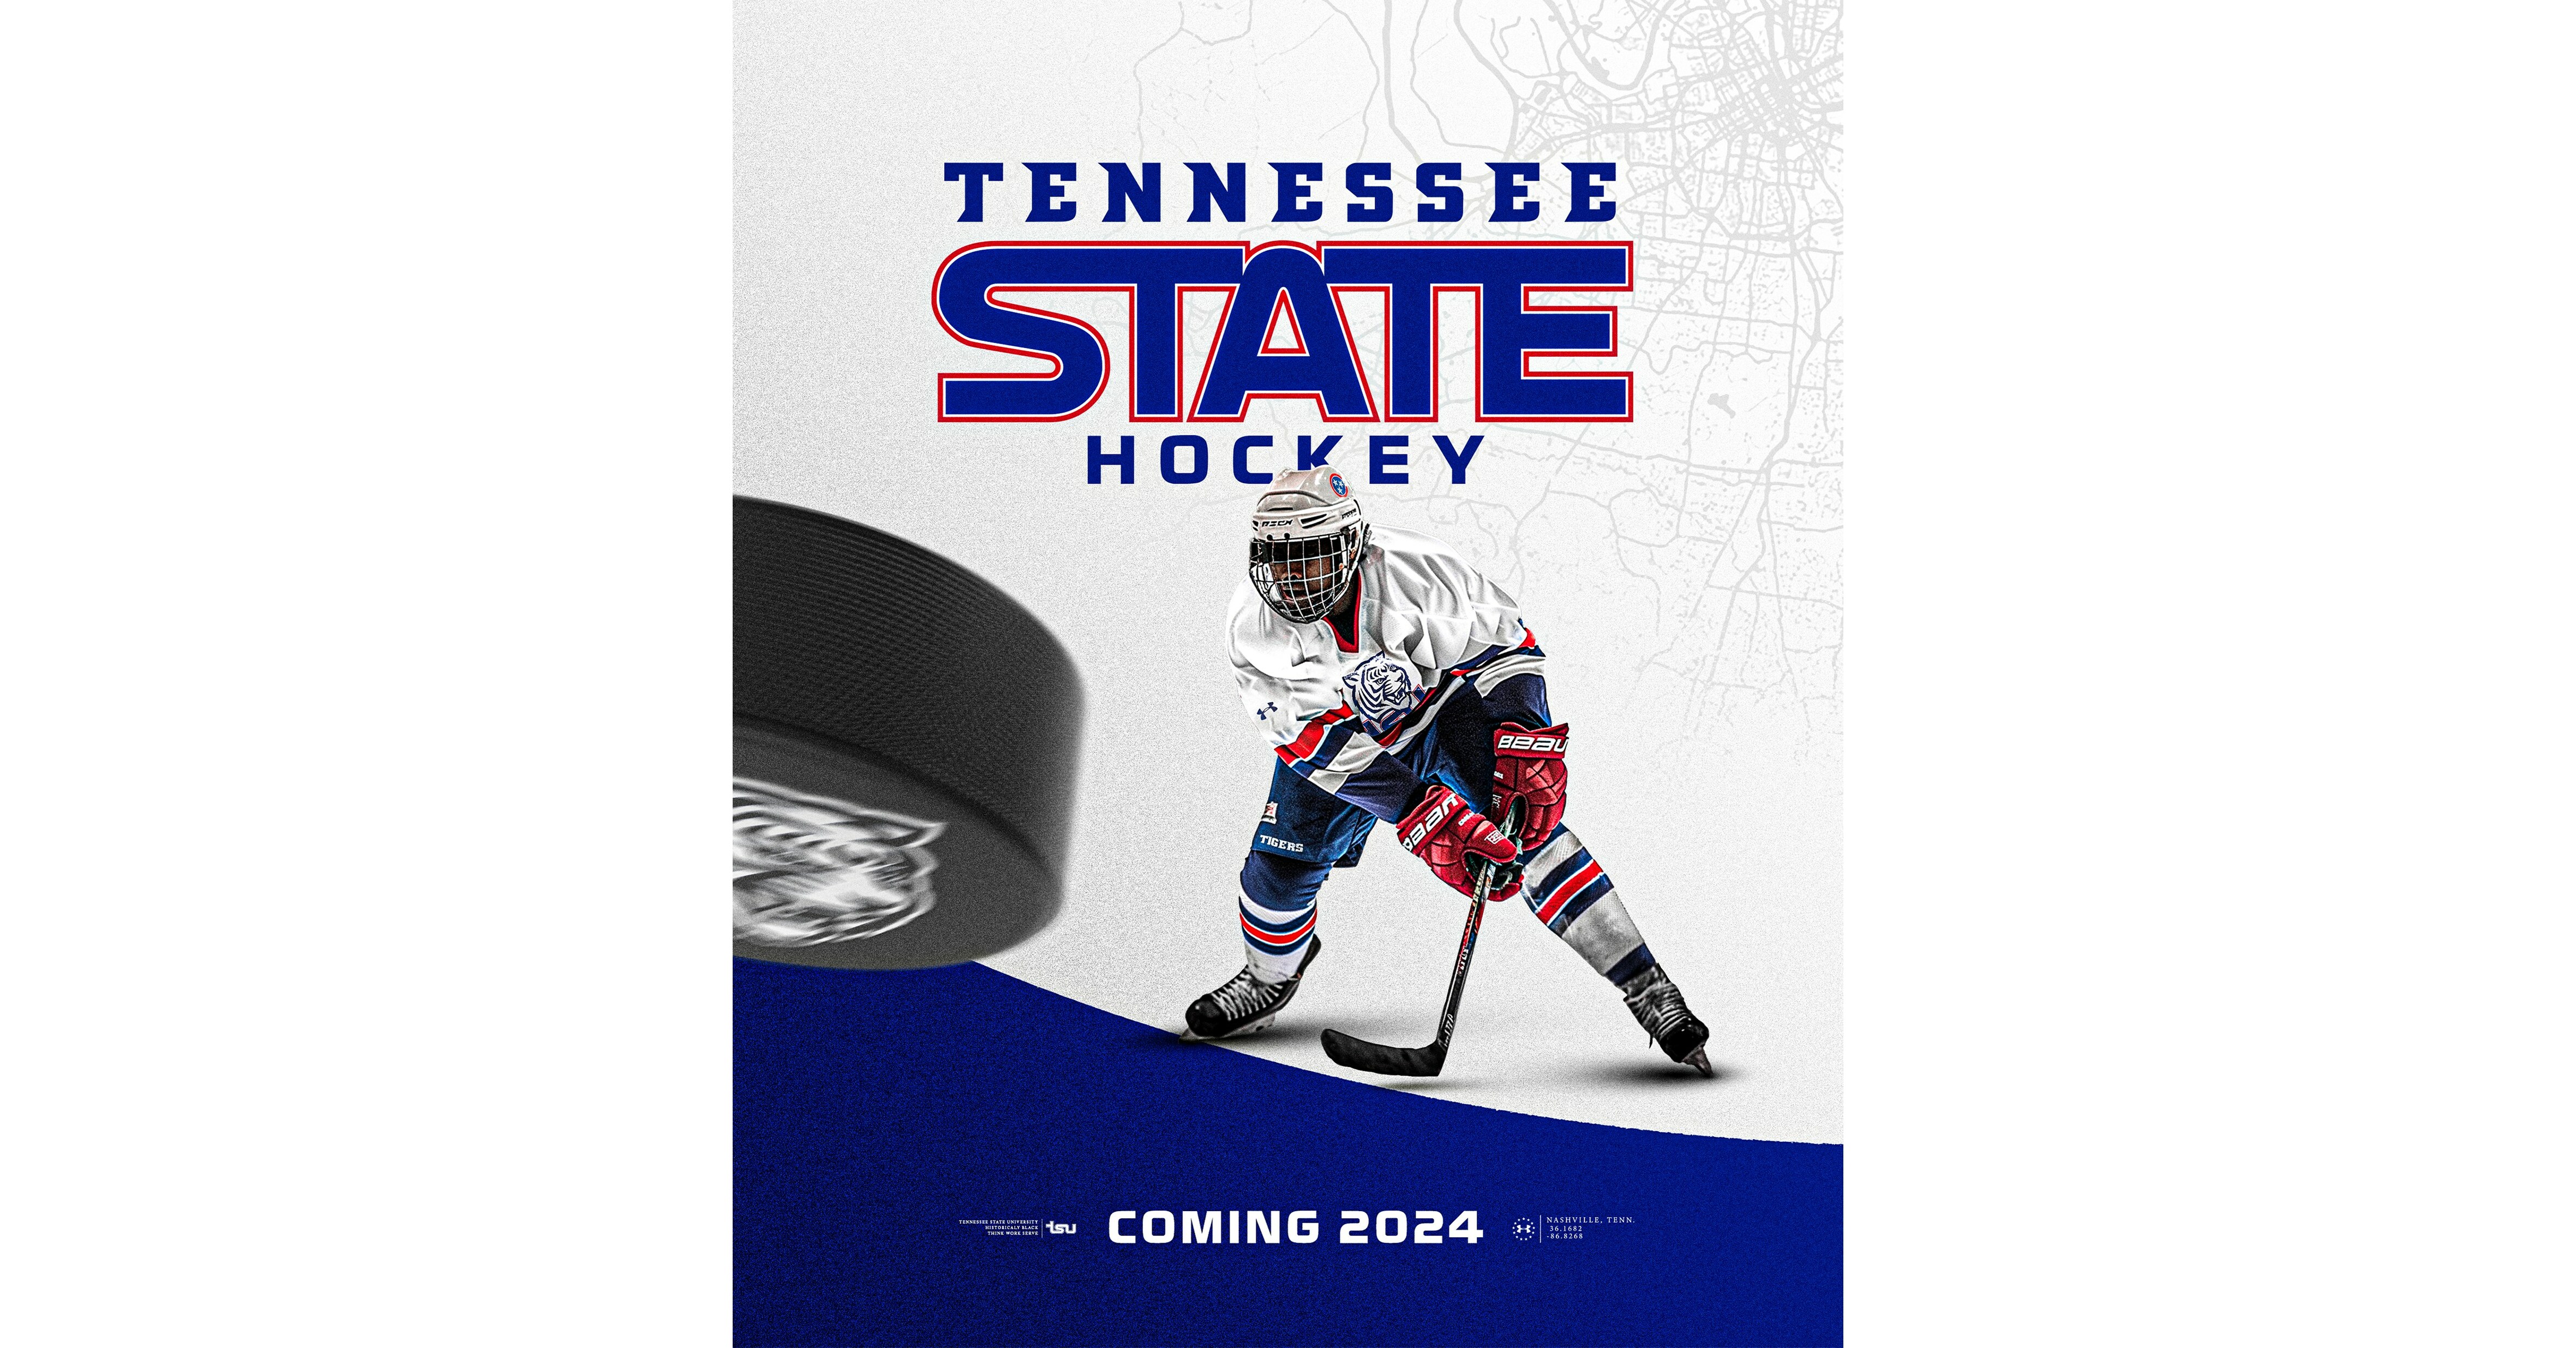 Tennessee State will become the first HBCU to add ice hockey - WBBJ TV